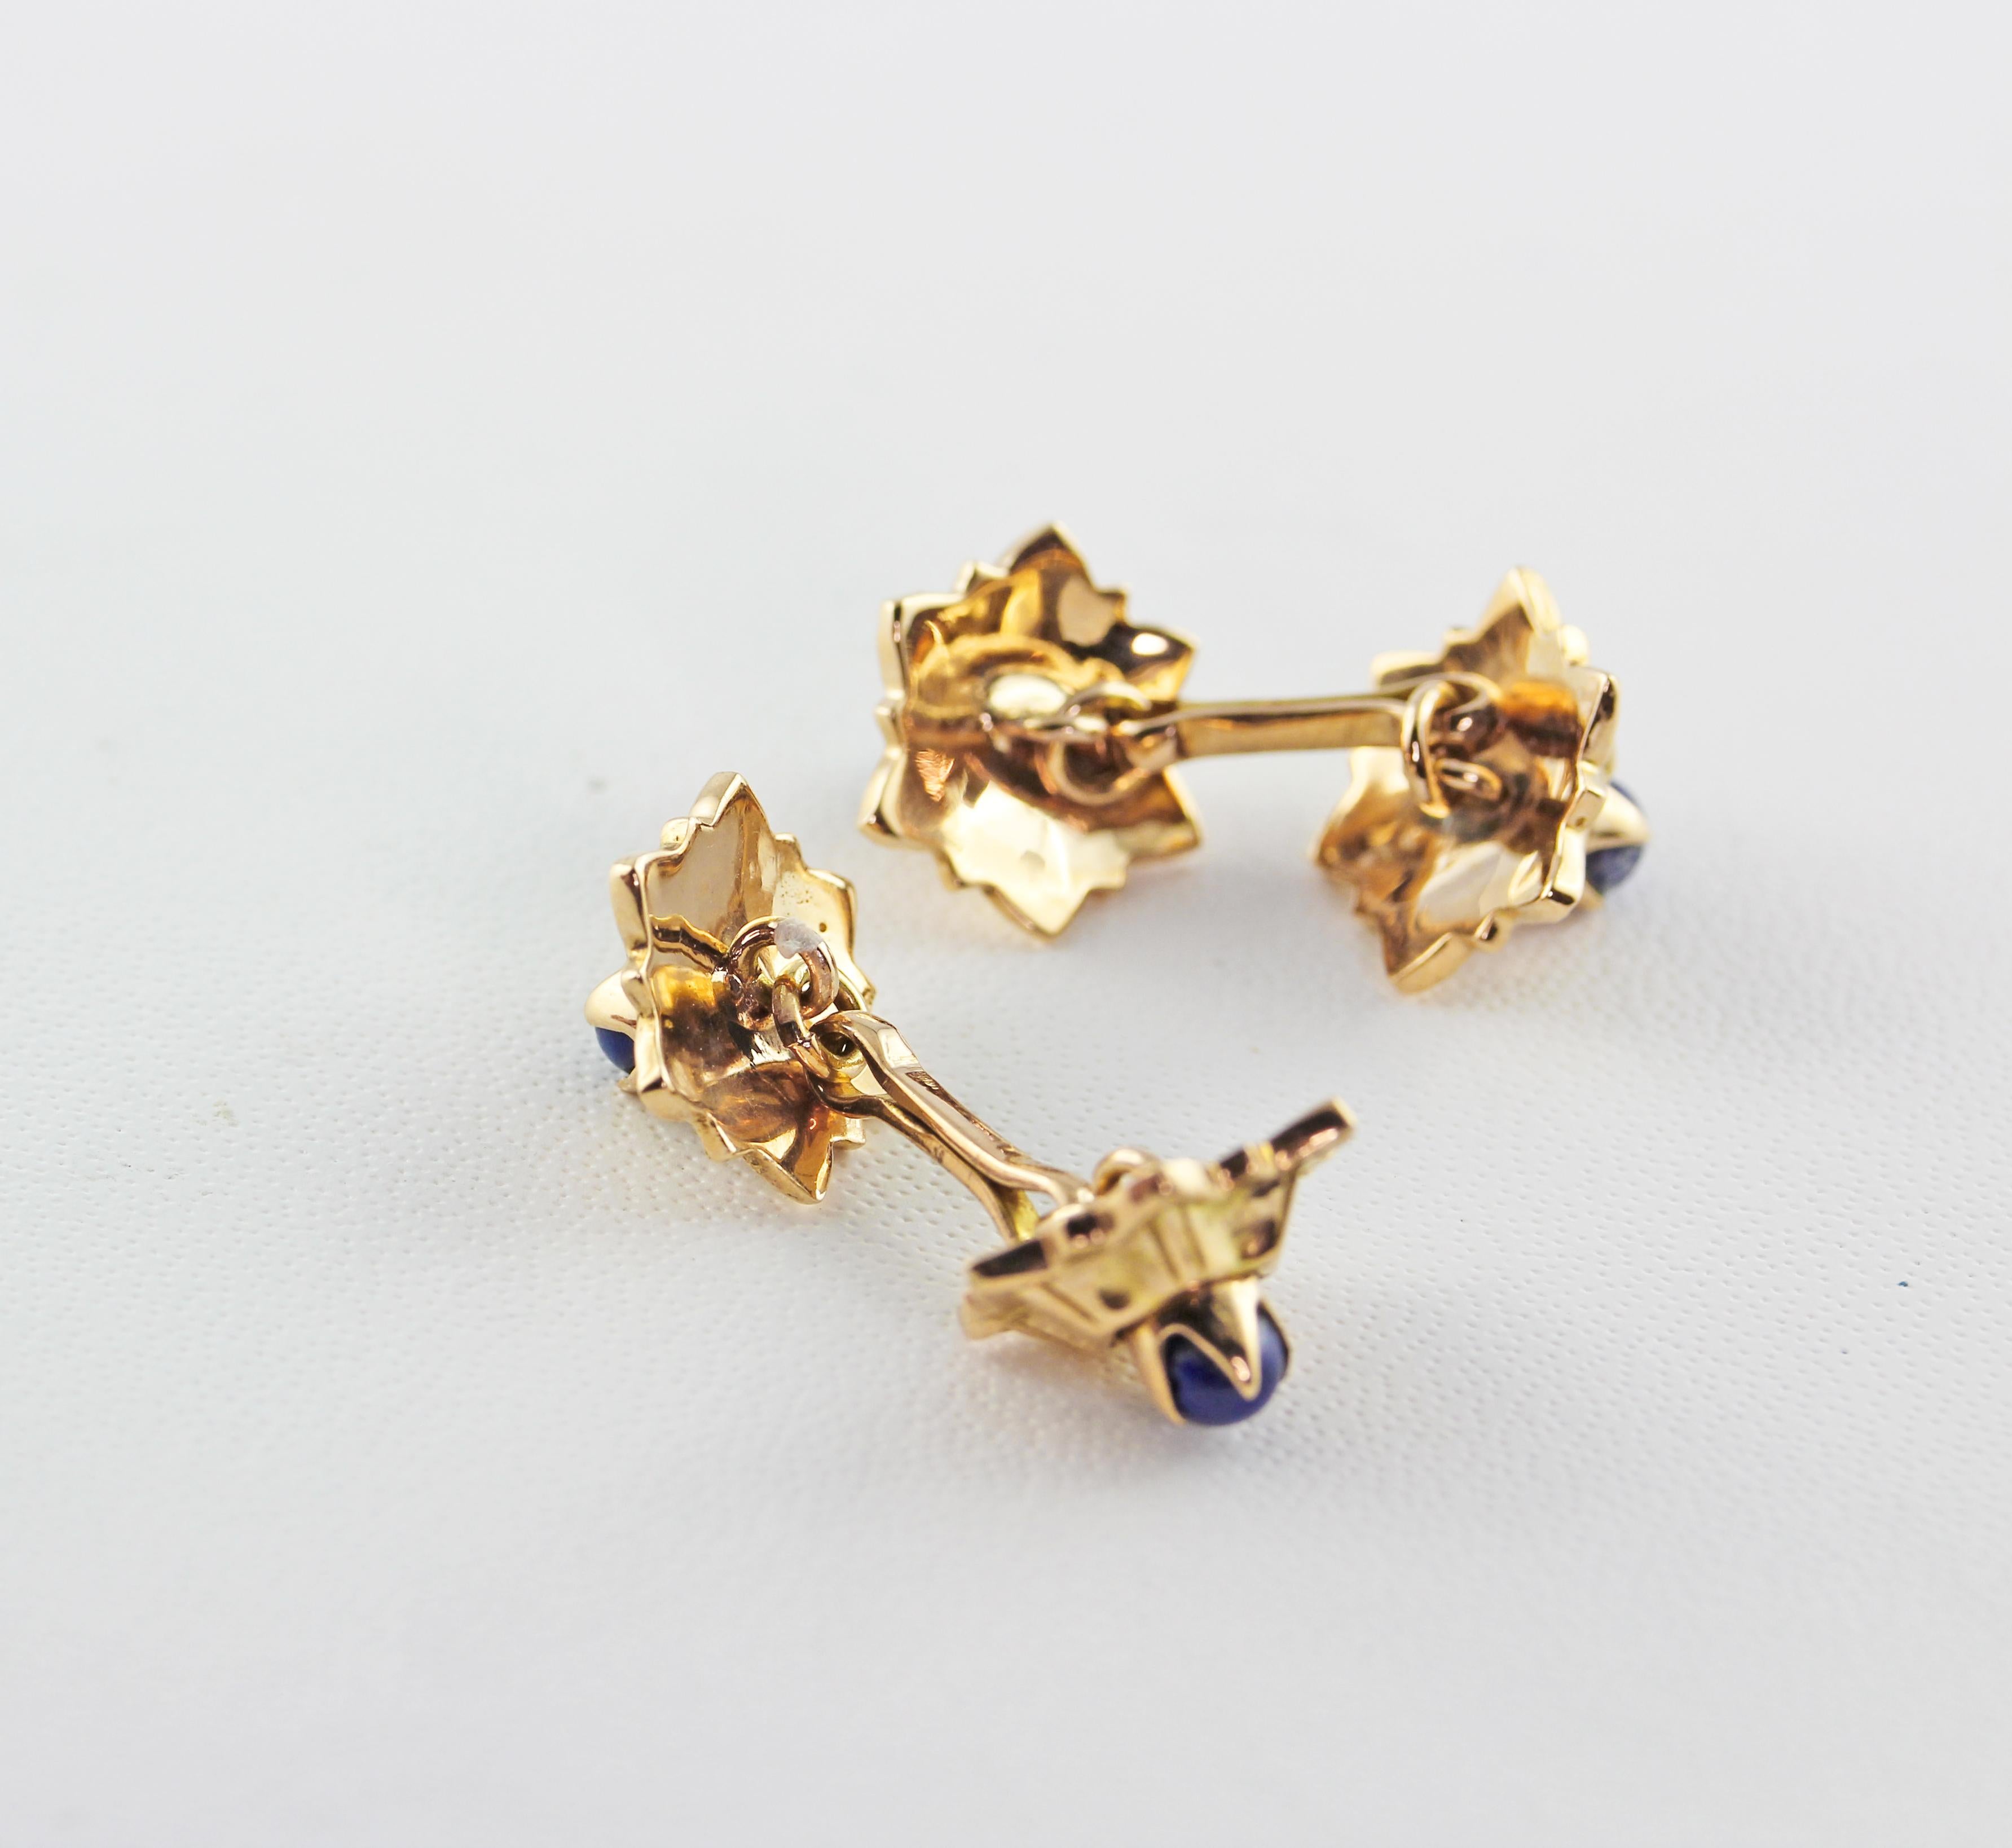 These cufflinks have been made to recreate a star with six points and realized in 18 karat yellow gold, each element is adorned in the center by a sphere in lapis lazuli.
Circa 1950.

The item will arrive beautifully gift wrapped in a AVGVSTA box,